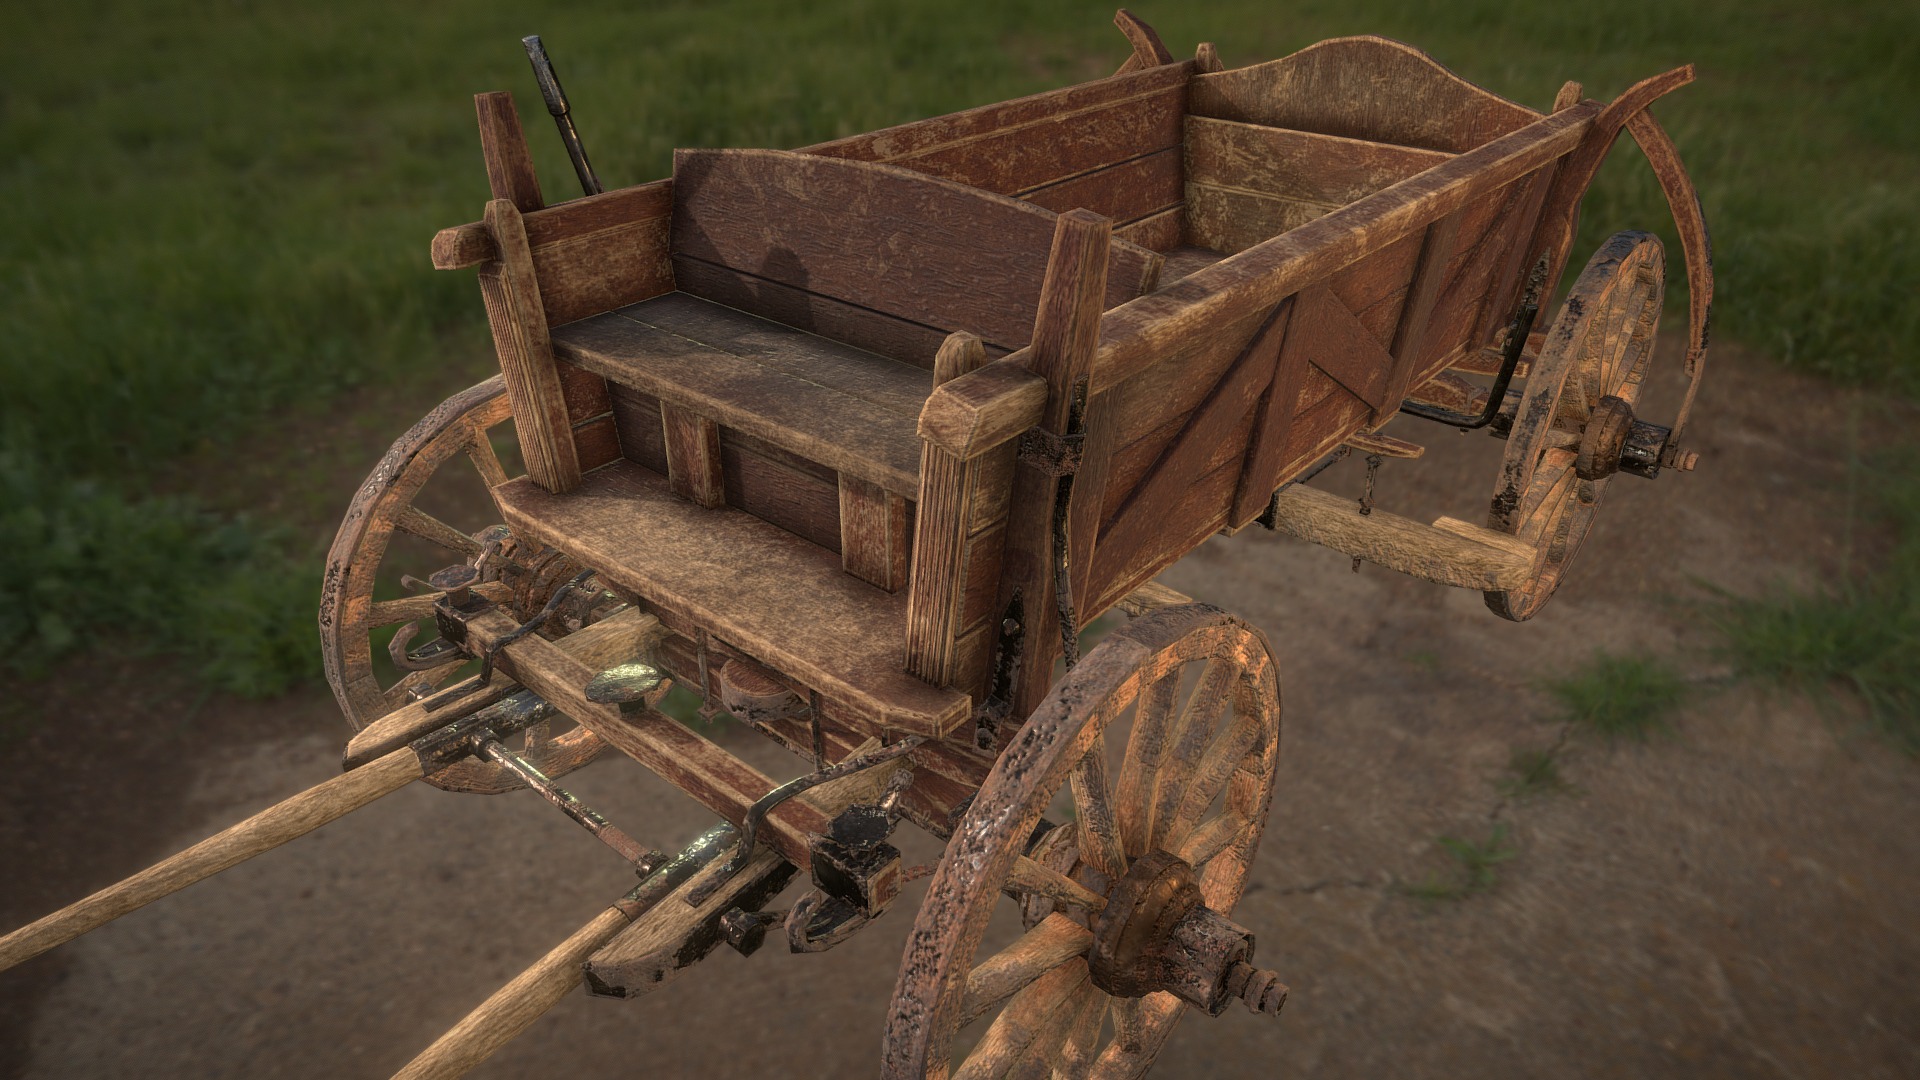 3D model Horse Cart – UE4 Ready - This is a 3D model of the Horse Cart - UE4 Ready. The 3D model is about a wooden wagon with wheels.